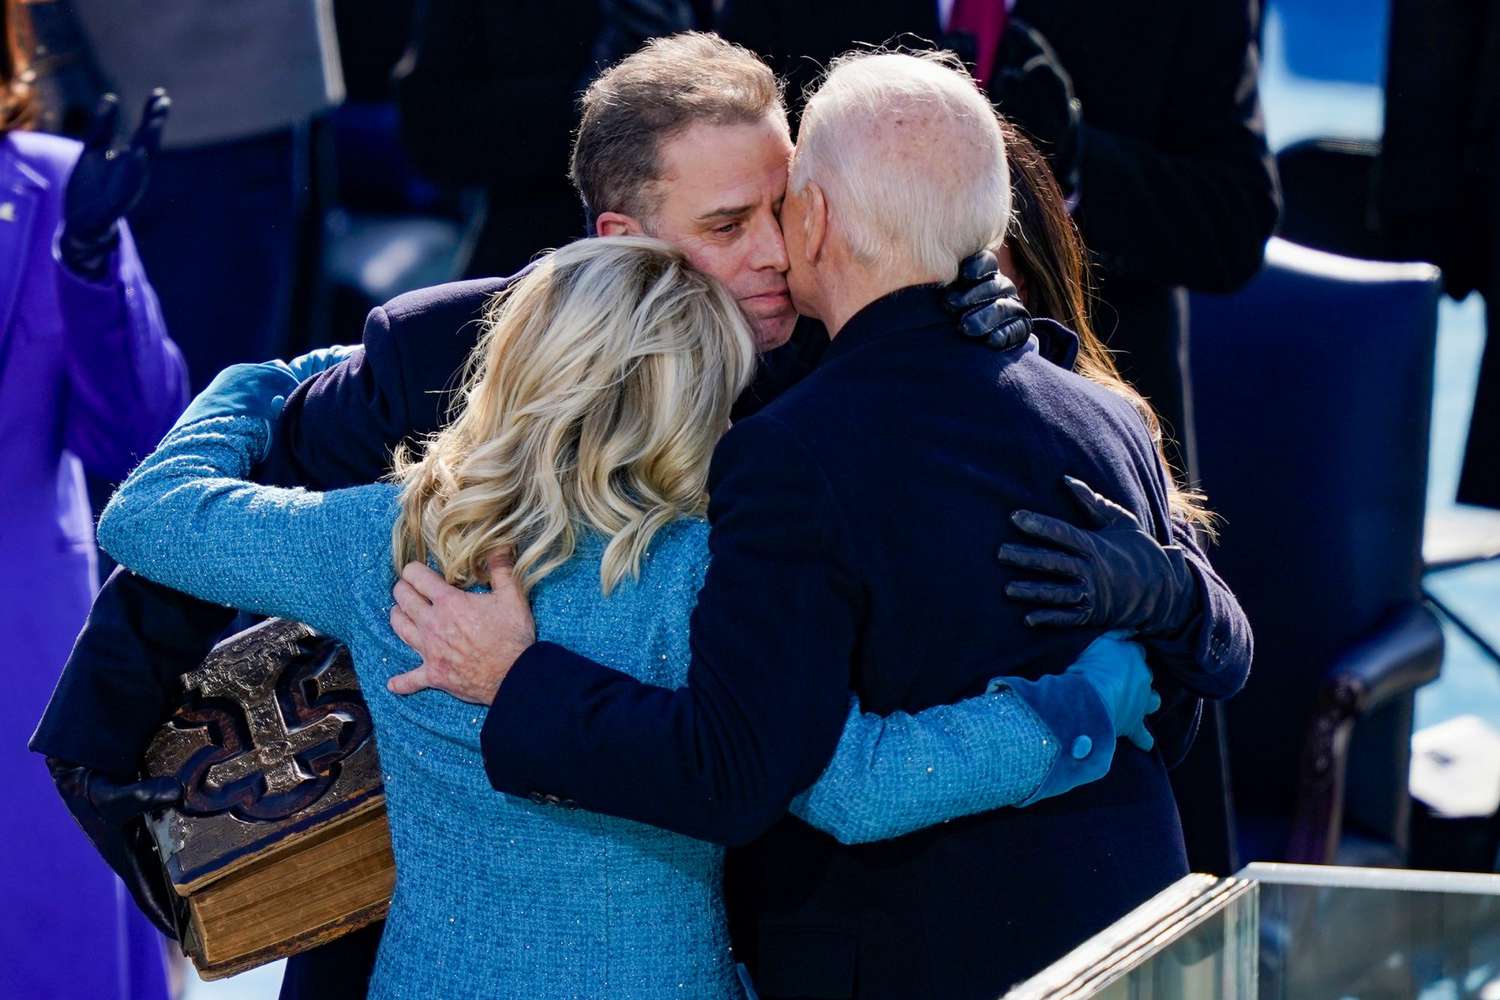 U.S. President Joe Biden embraces his family First Lady Dr. Jill Biden, son Hunter Biden and daughter Ashley after being sworn in during his inauguation on the West Front of the U.S. Capitol on January 20, 2021 in Washington, DC